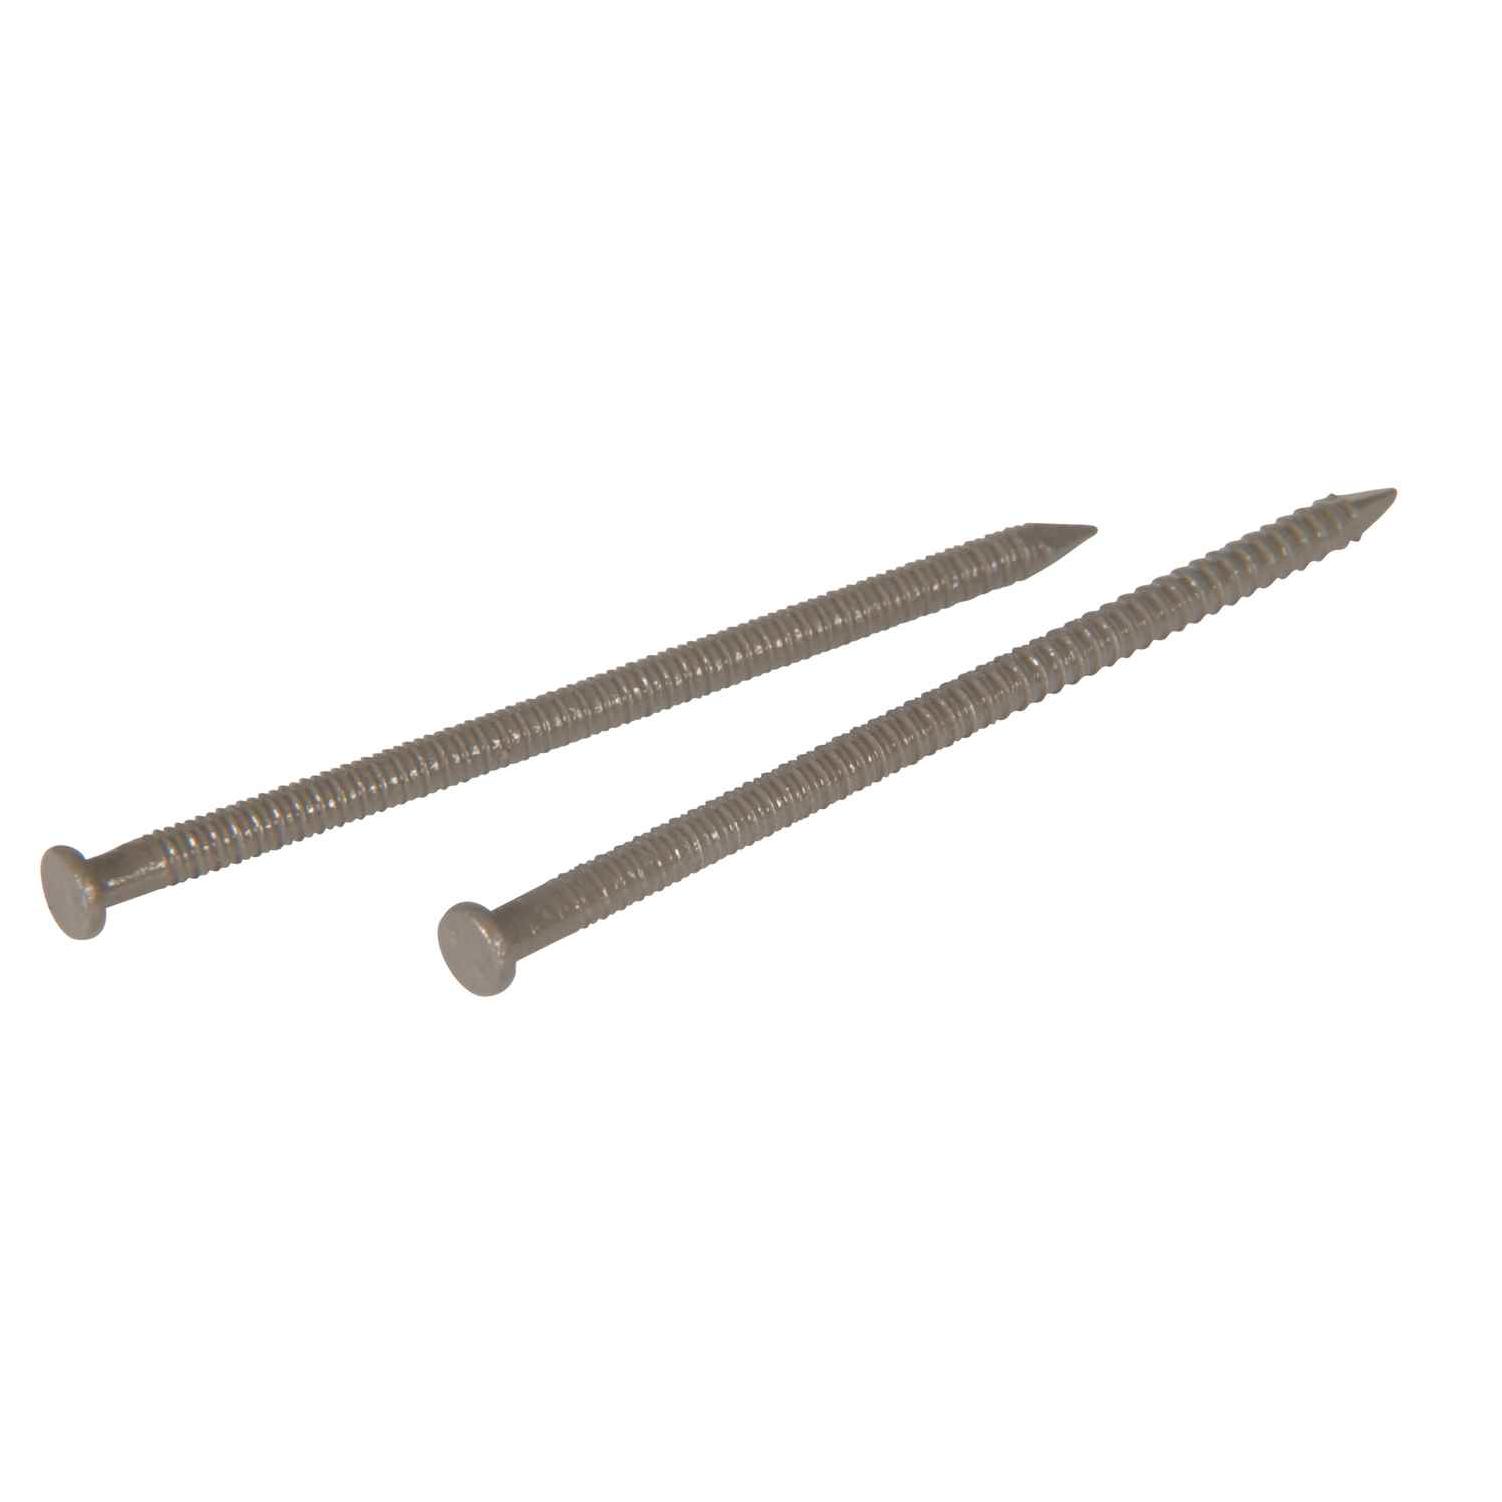 100 x 70mm Annular Ring Shank Nails Steel Zinc Plated HIGH SS8® Quality :  Amazon.co.uk: DIY & Tools